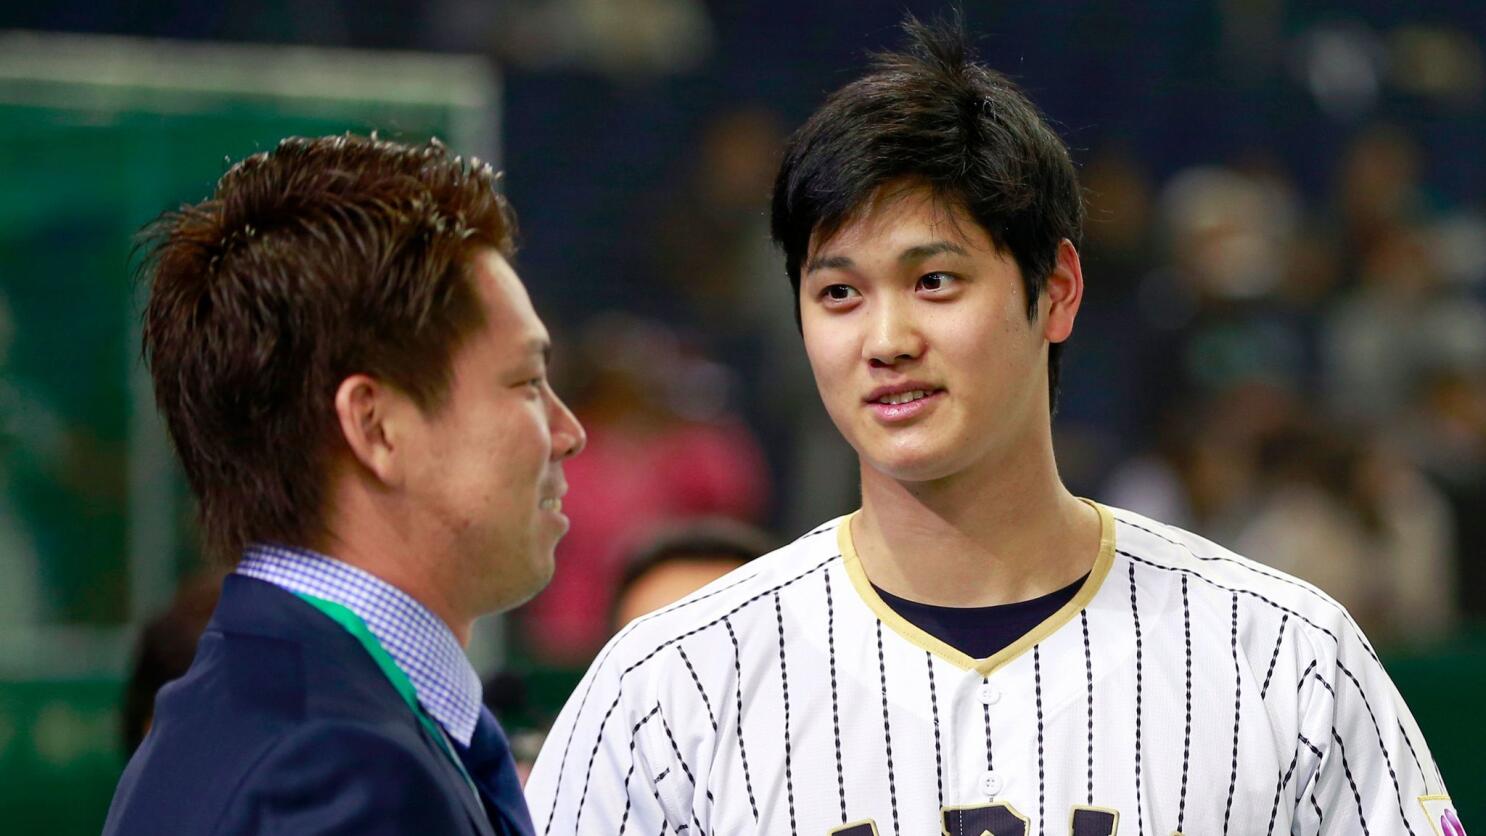 Fighters grant Shohei Otani's wish to pursue move to major leagues - The  Japan Times